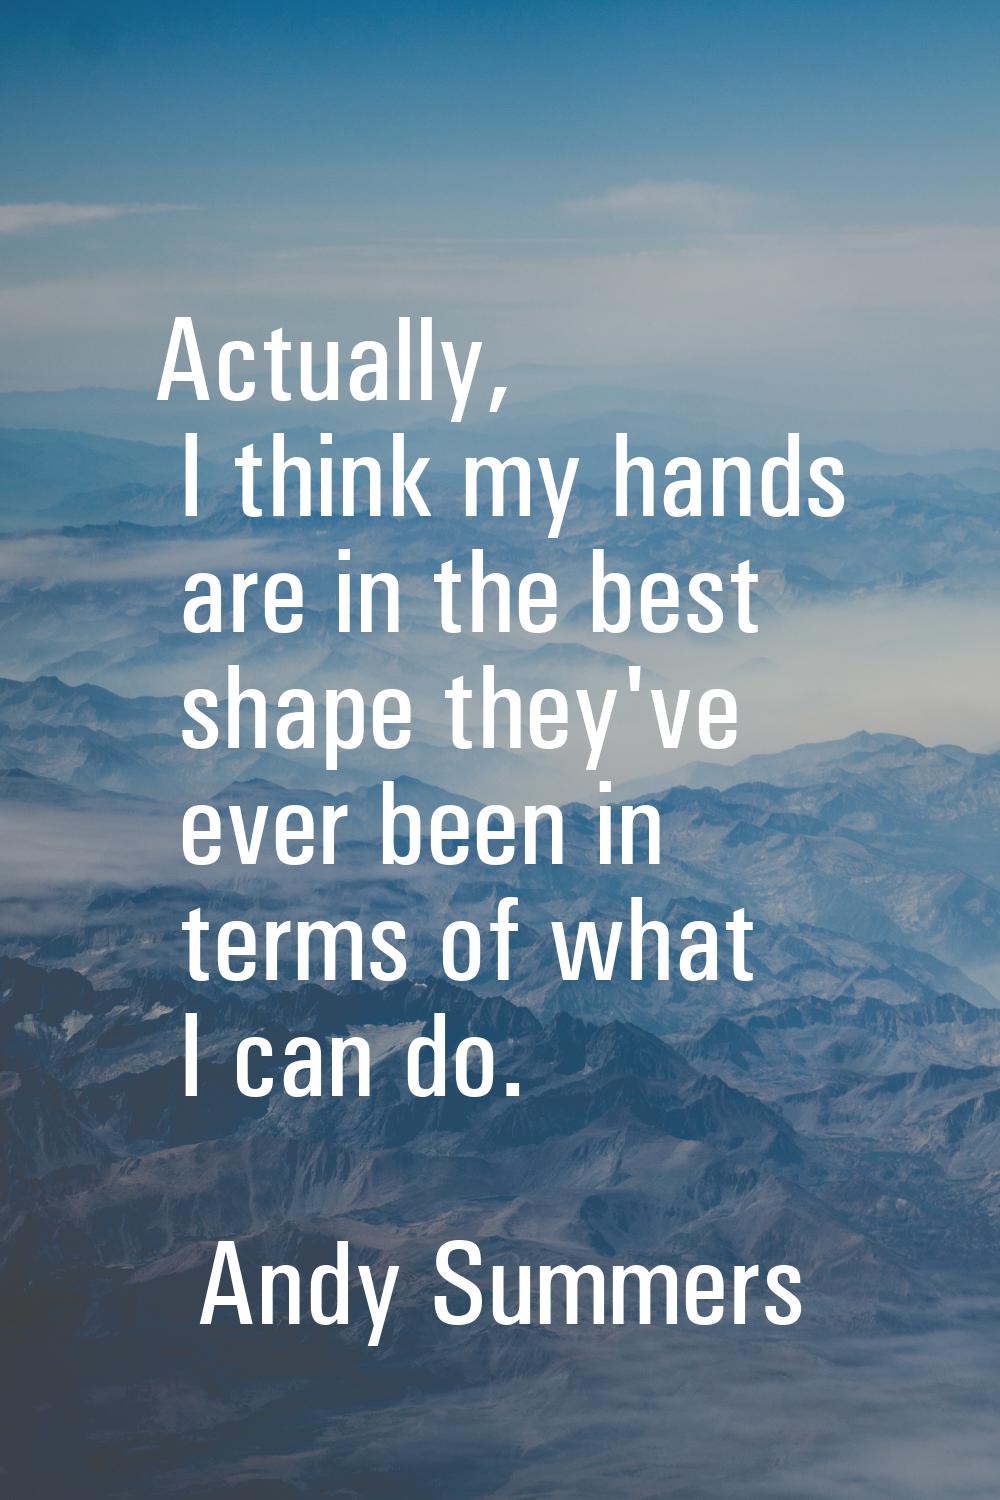 Actually, I think my hands are in the best shape they've ever been in terms of what I can do.